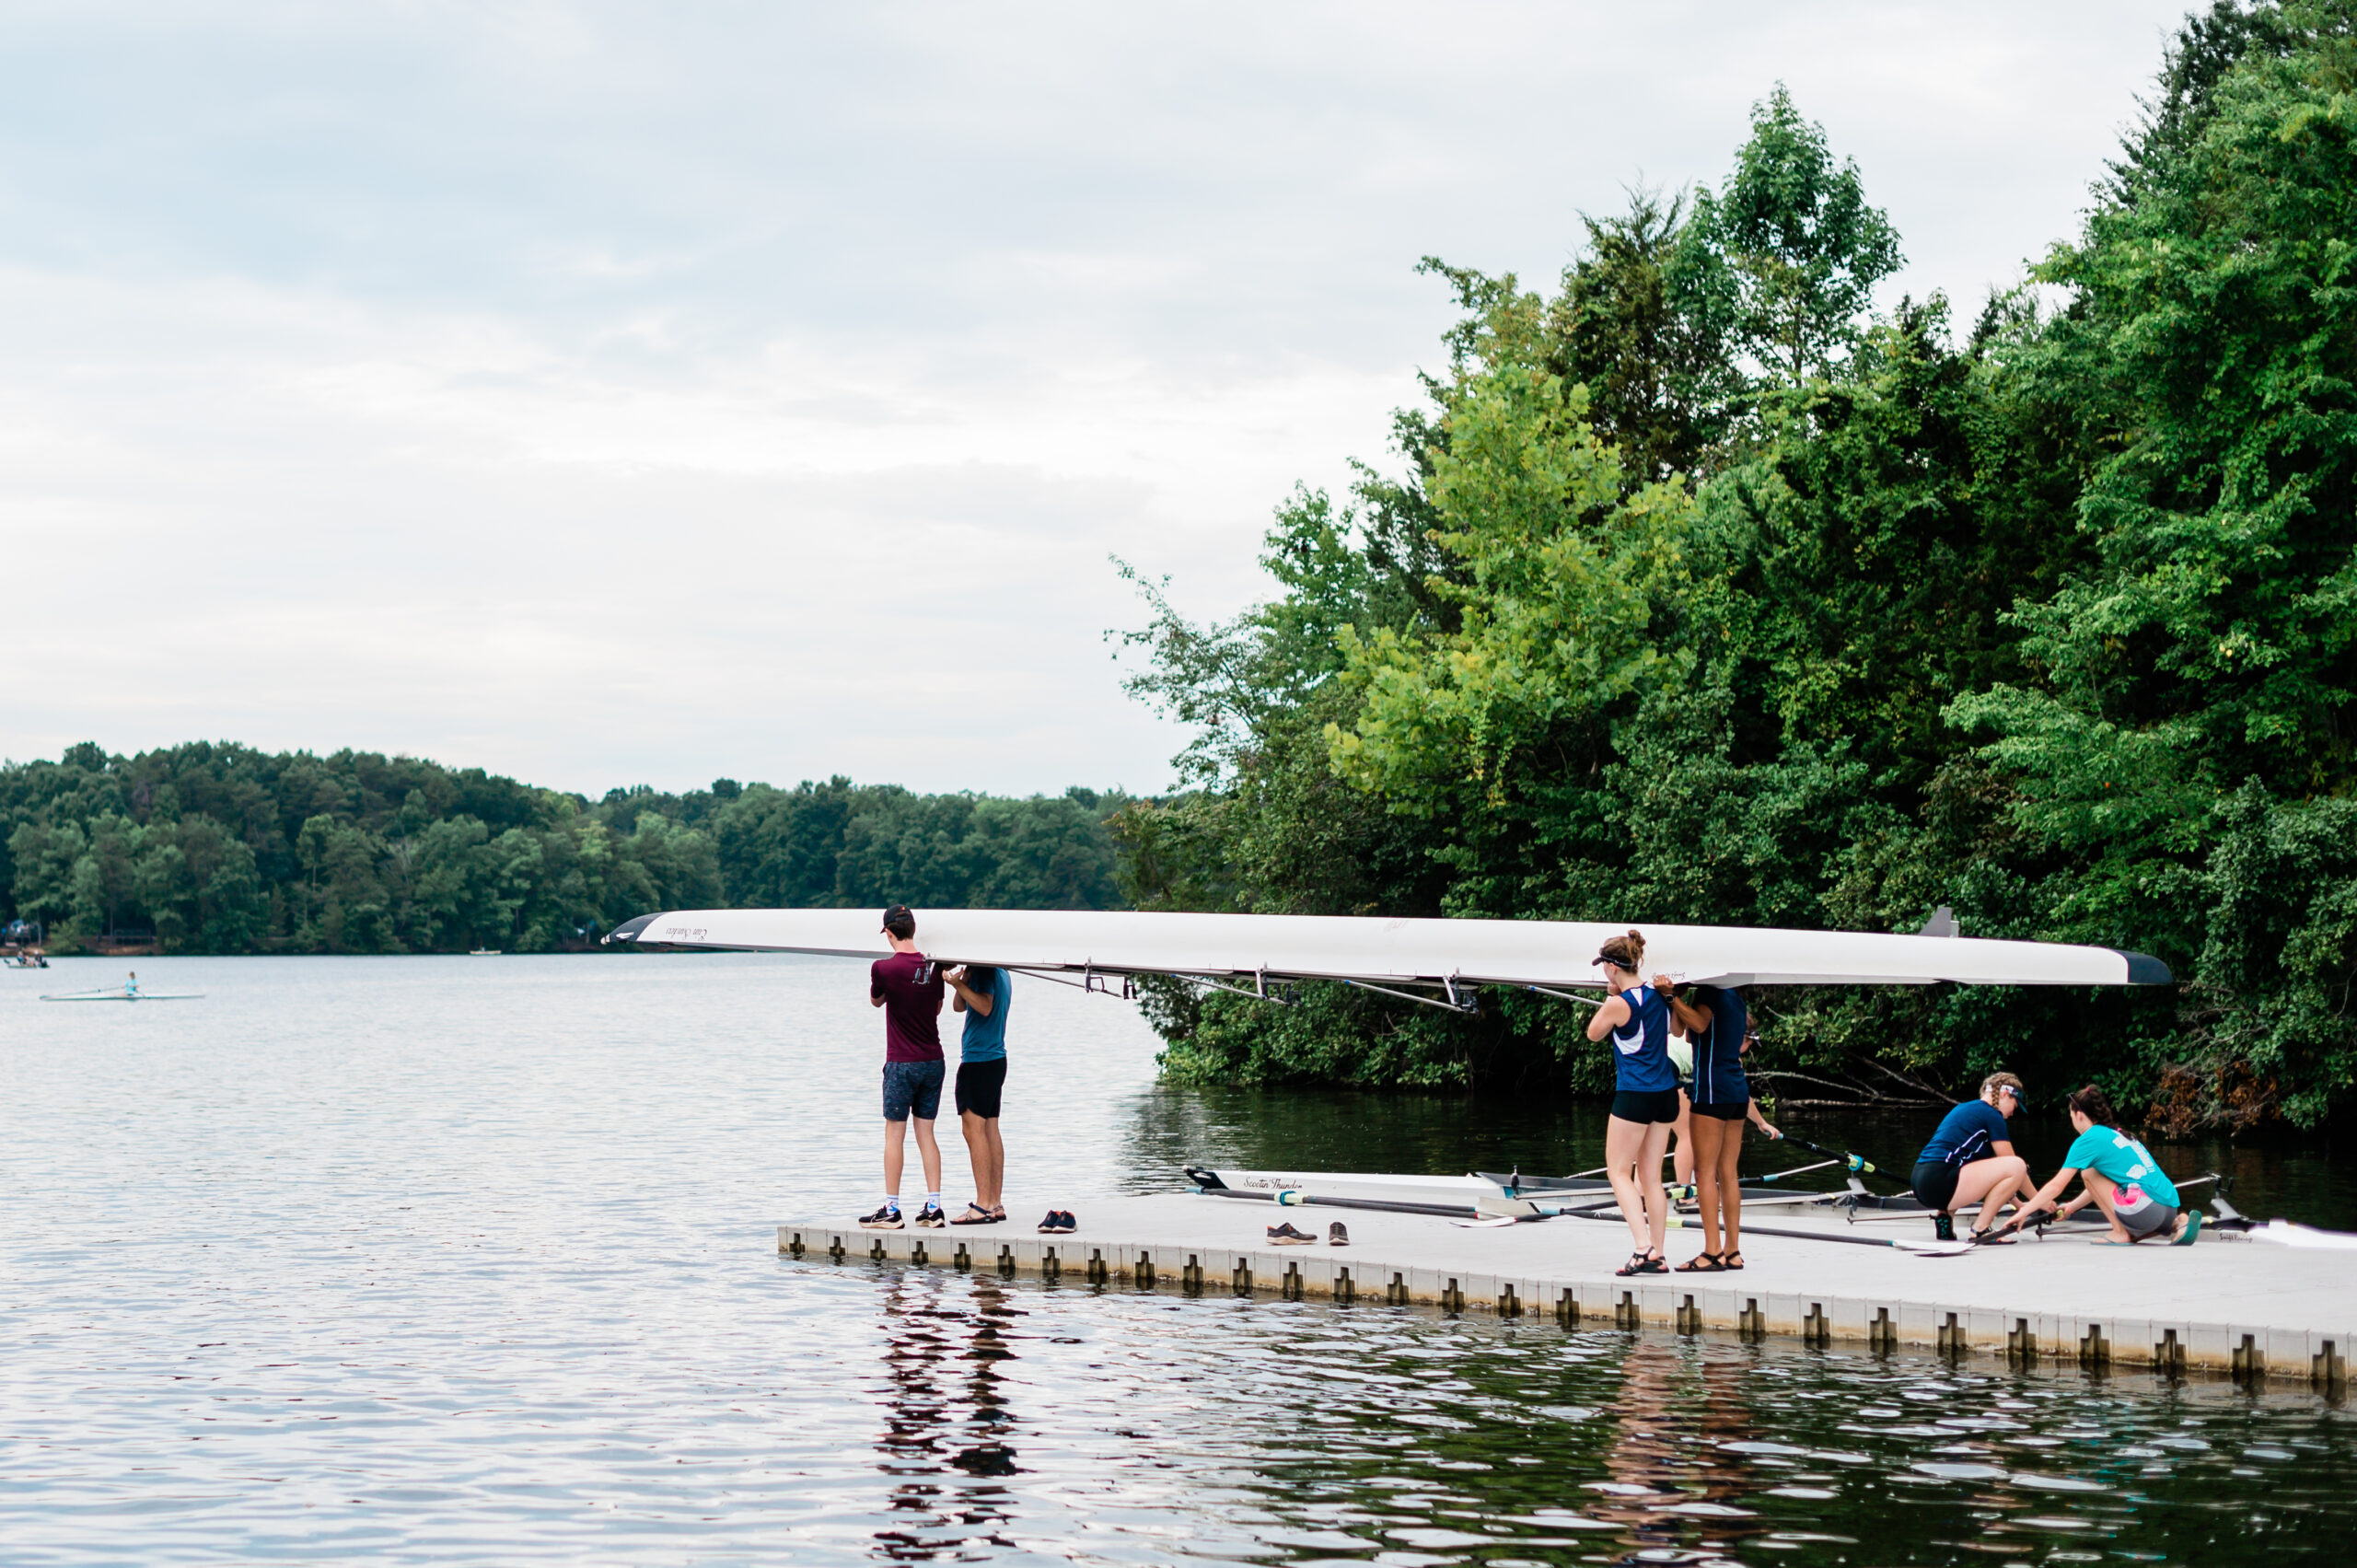 Rowers carry a boat down the dock at Oak Hollow Lake in High Point, NC.